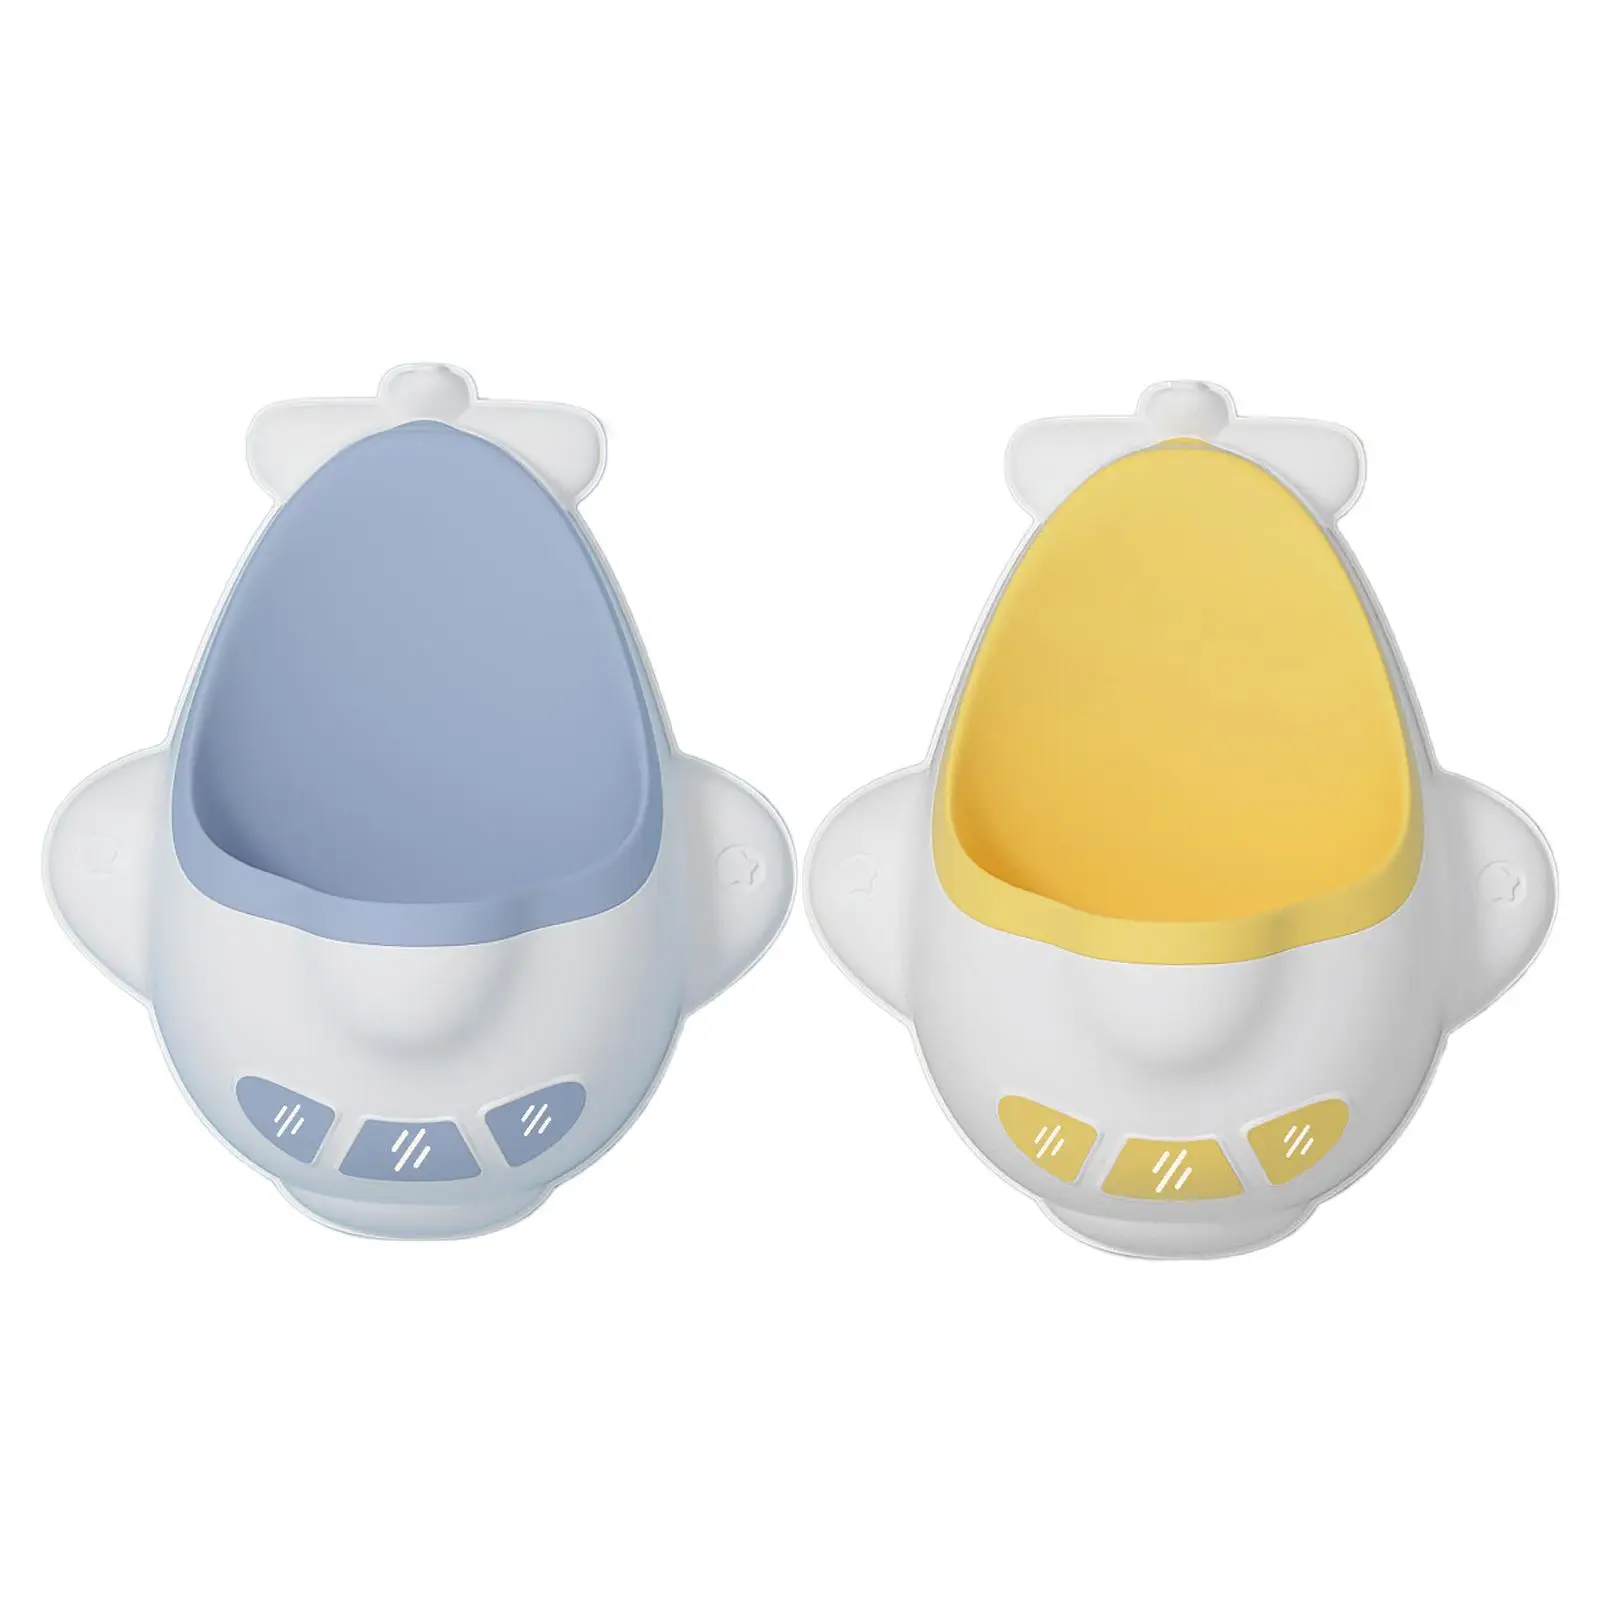 Boys Potty Training Urinal Potty with Removable Bowl Insert with Funny Aiming Target